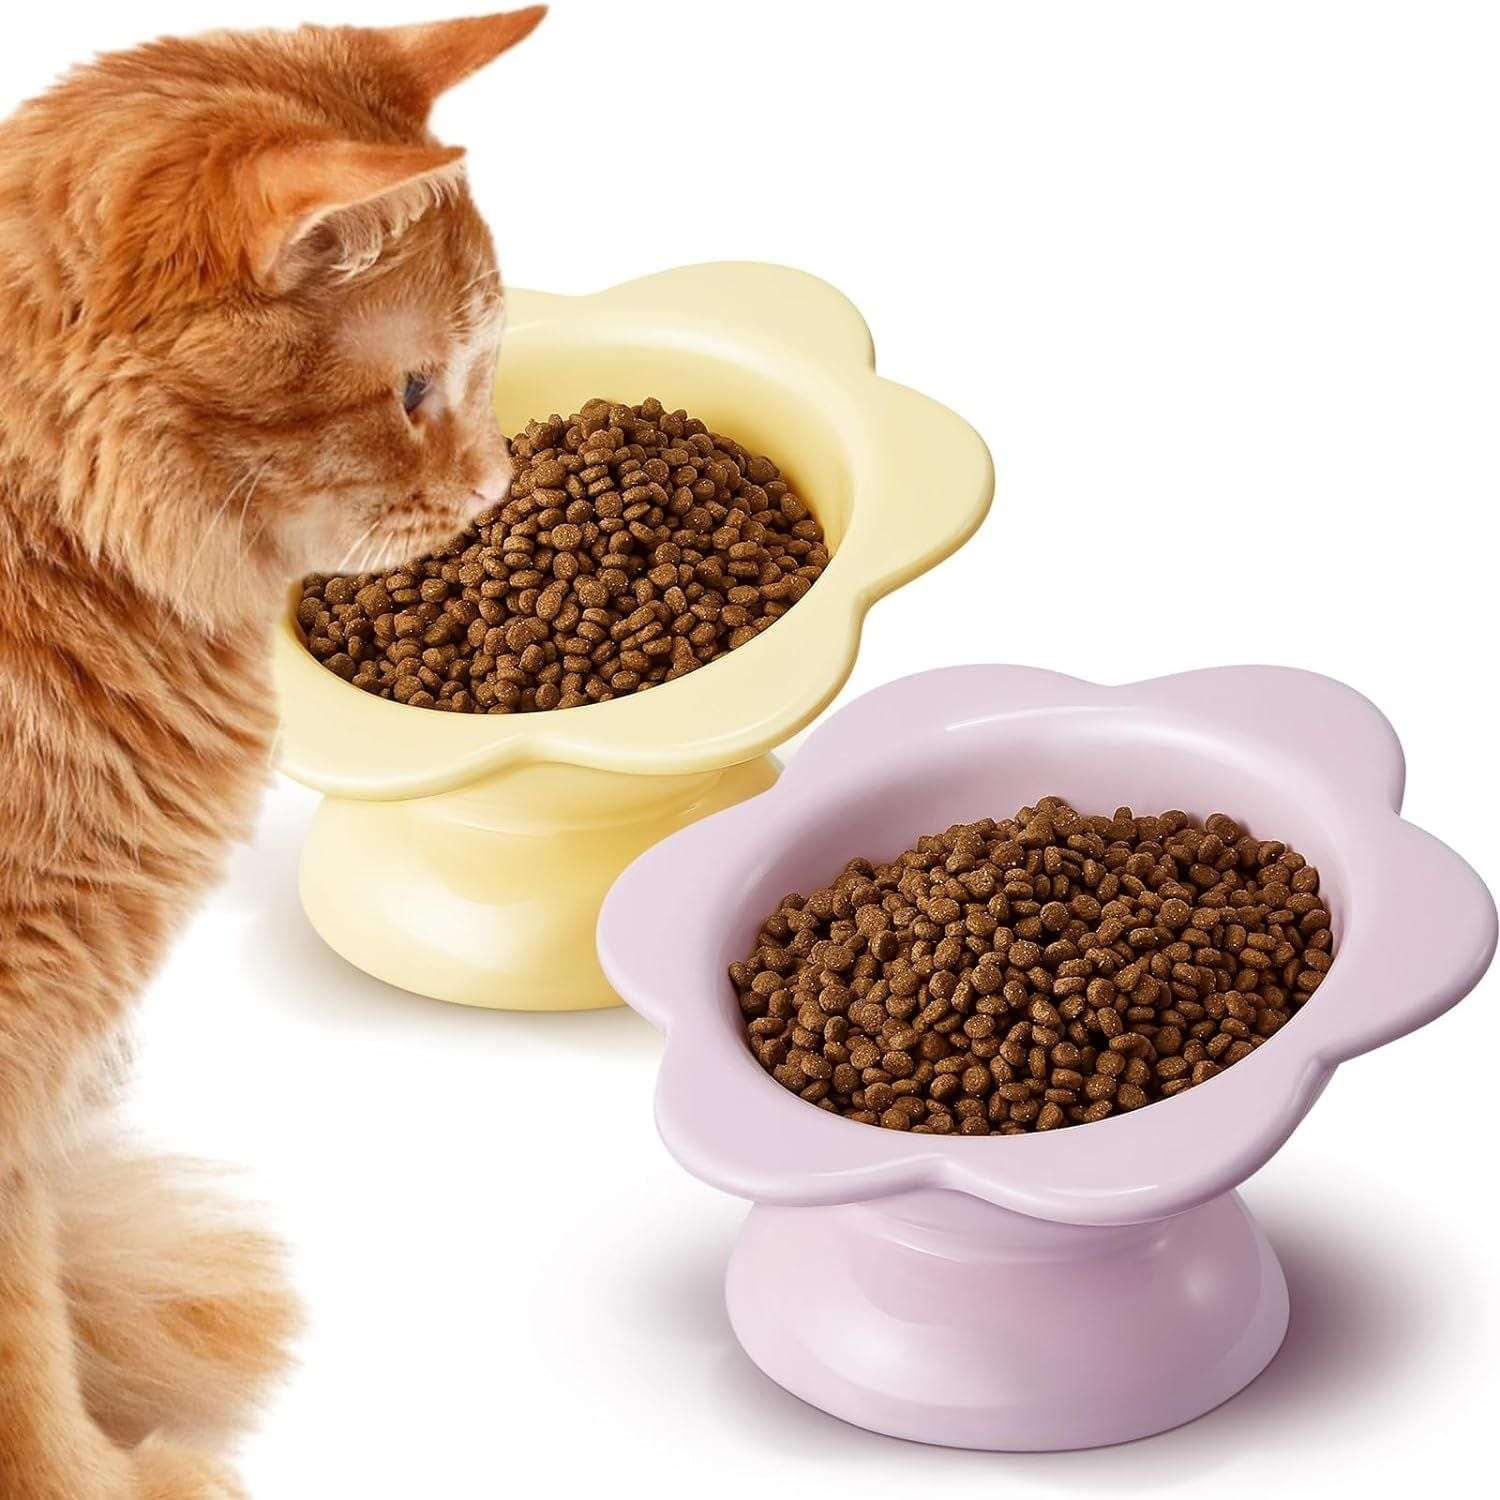 kutkutstyle feeding essentials Wide*Height: 12.5cm*10.4cm KUTKUT 2Pcs Ceramic Raised Cat Food Bowl, Tilted Flower Shaped Food or Water Bowl for Cats and Small Dogs, Anti Vomiting Pet Feeder Dish Whisker Fatigue Cat Bowl (Capacity: 200ML)